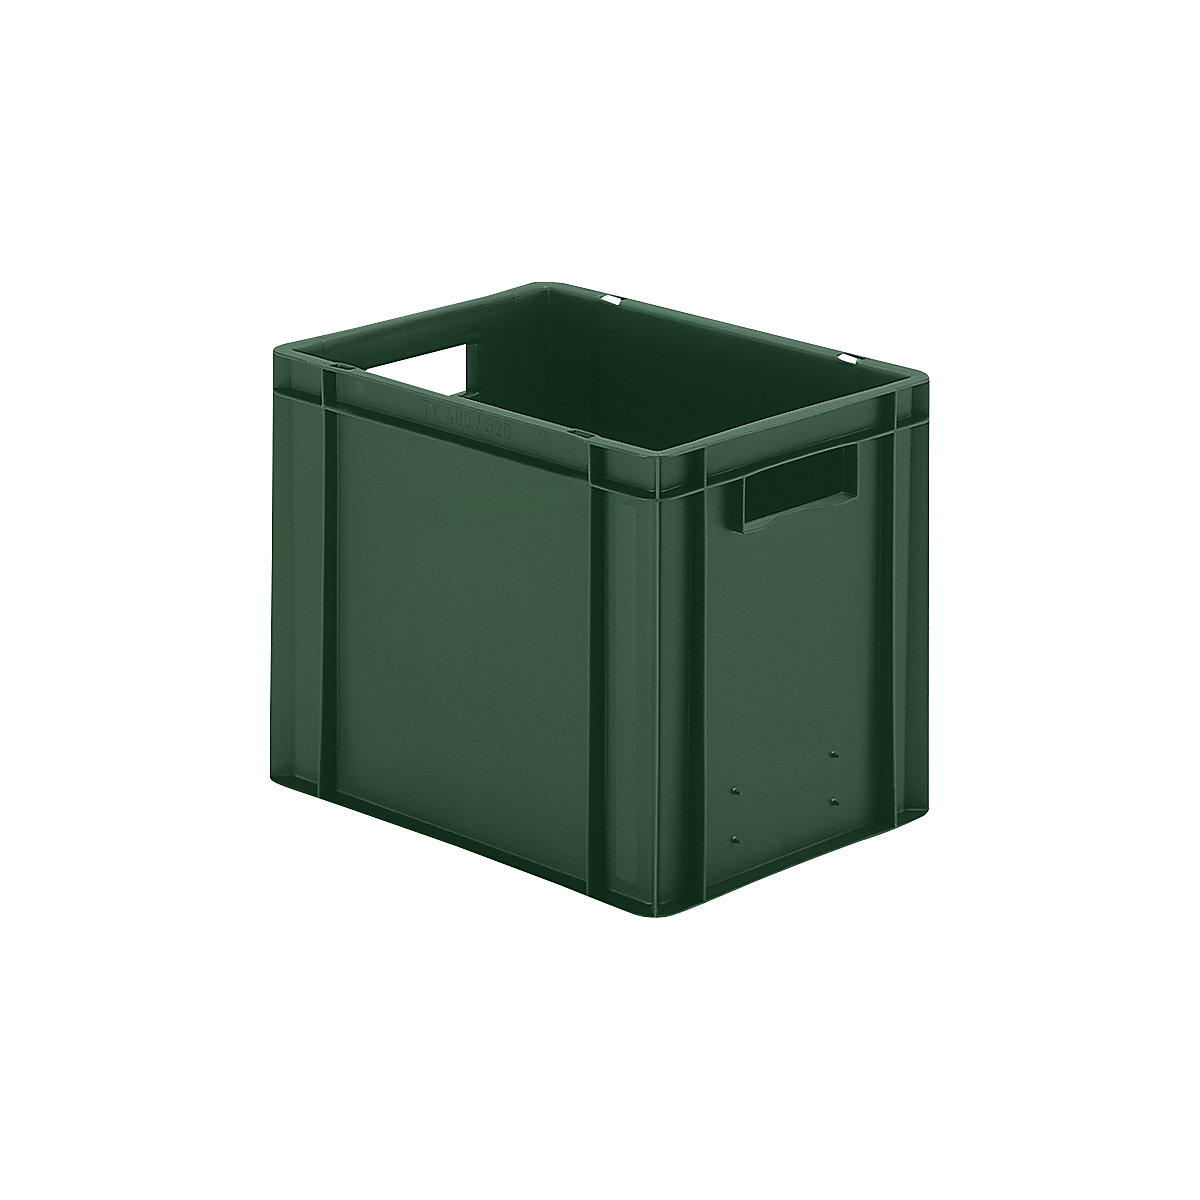 Euro stacking container, closed walls and base, LxWxH 400 x 300 x 320 mm, green, pack of 5